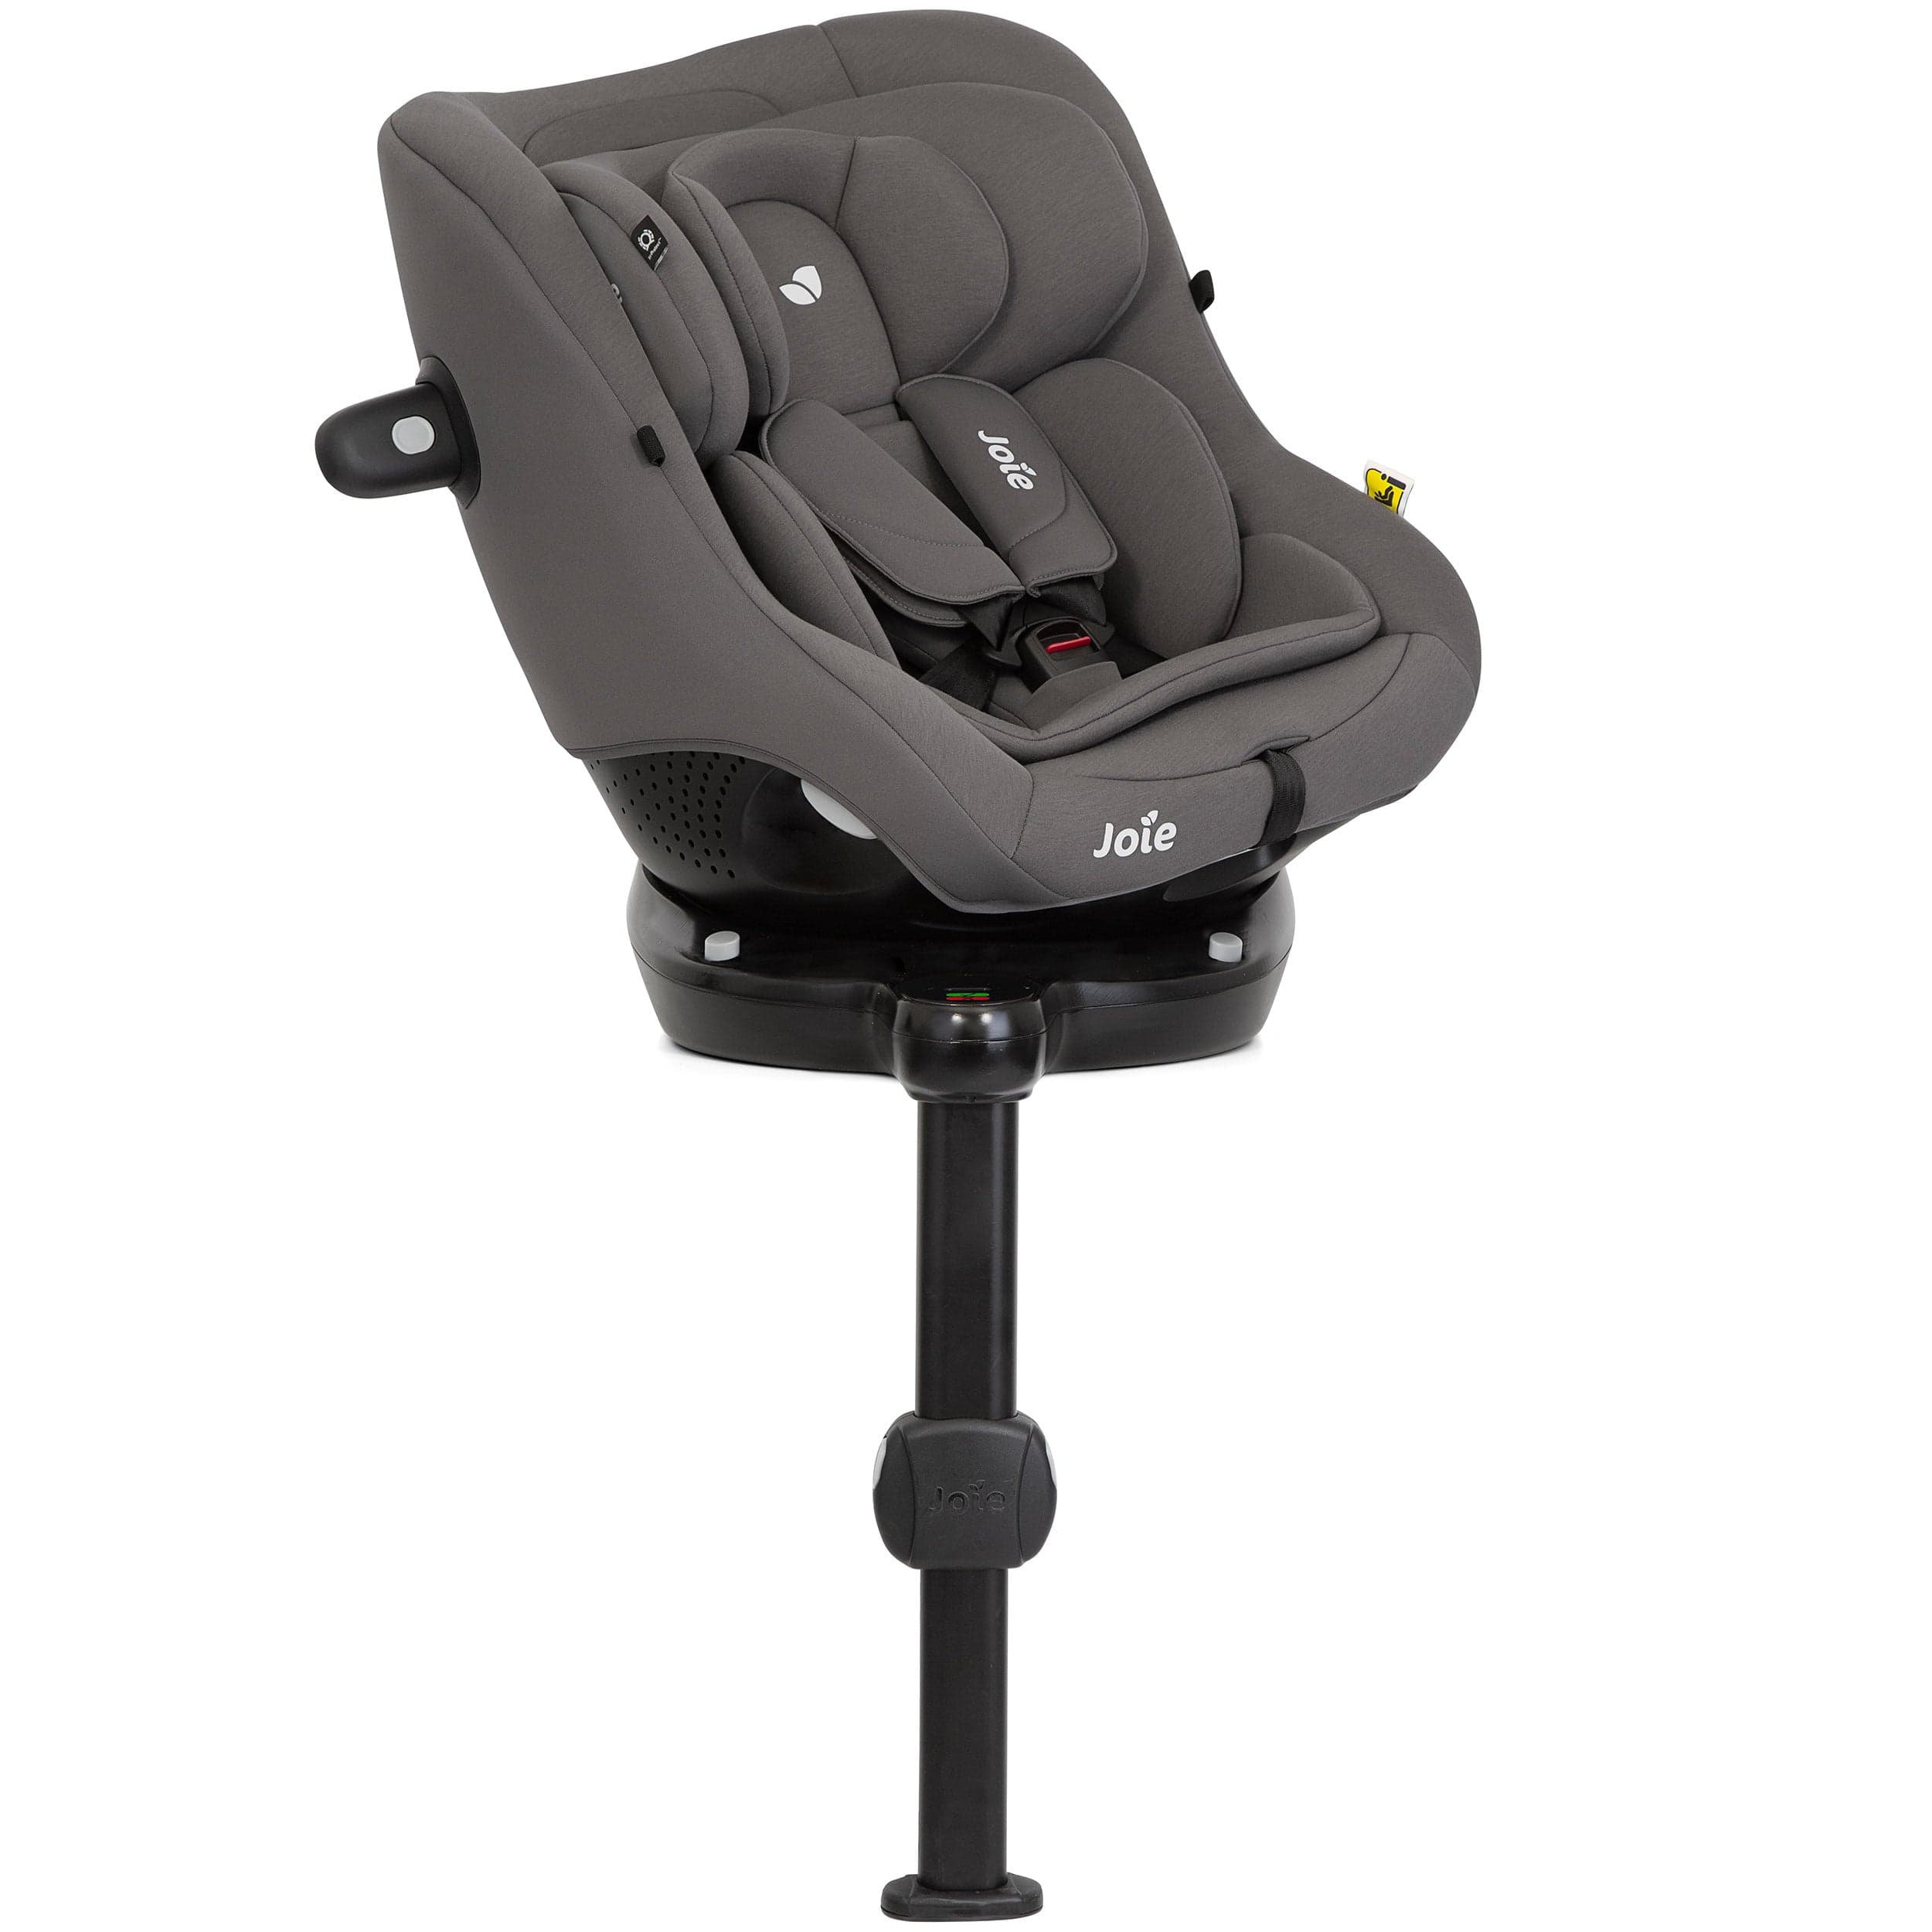 Joie i-Pivot 360 Car Seat in Thunder Baby Car Seats C2302AATHD000 5056080618630